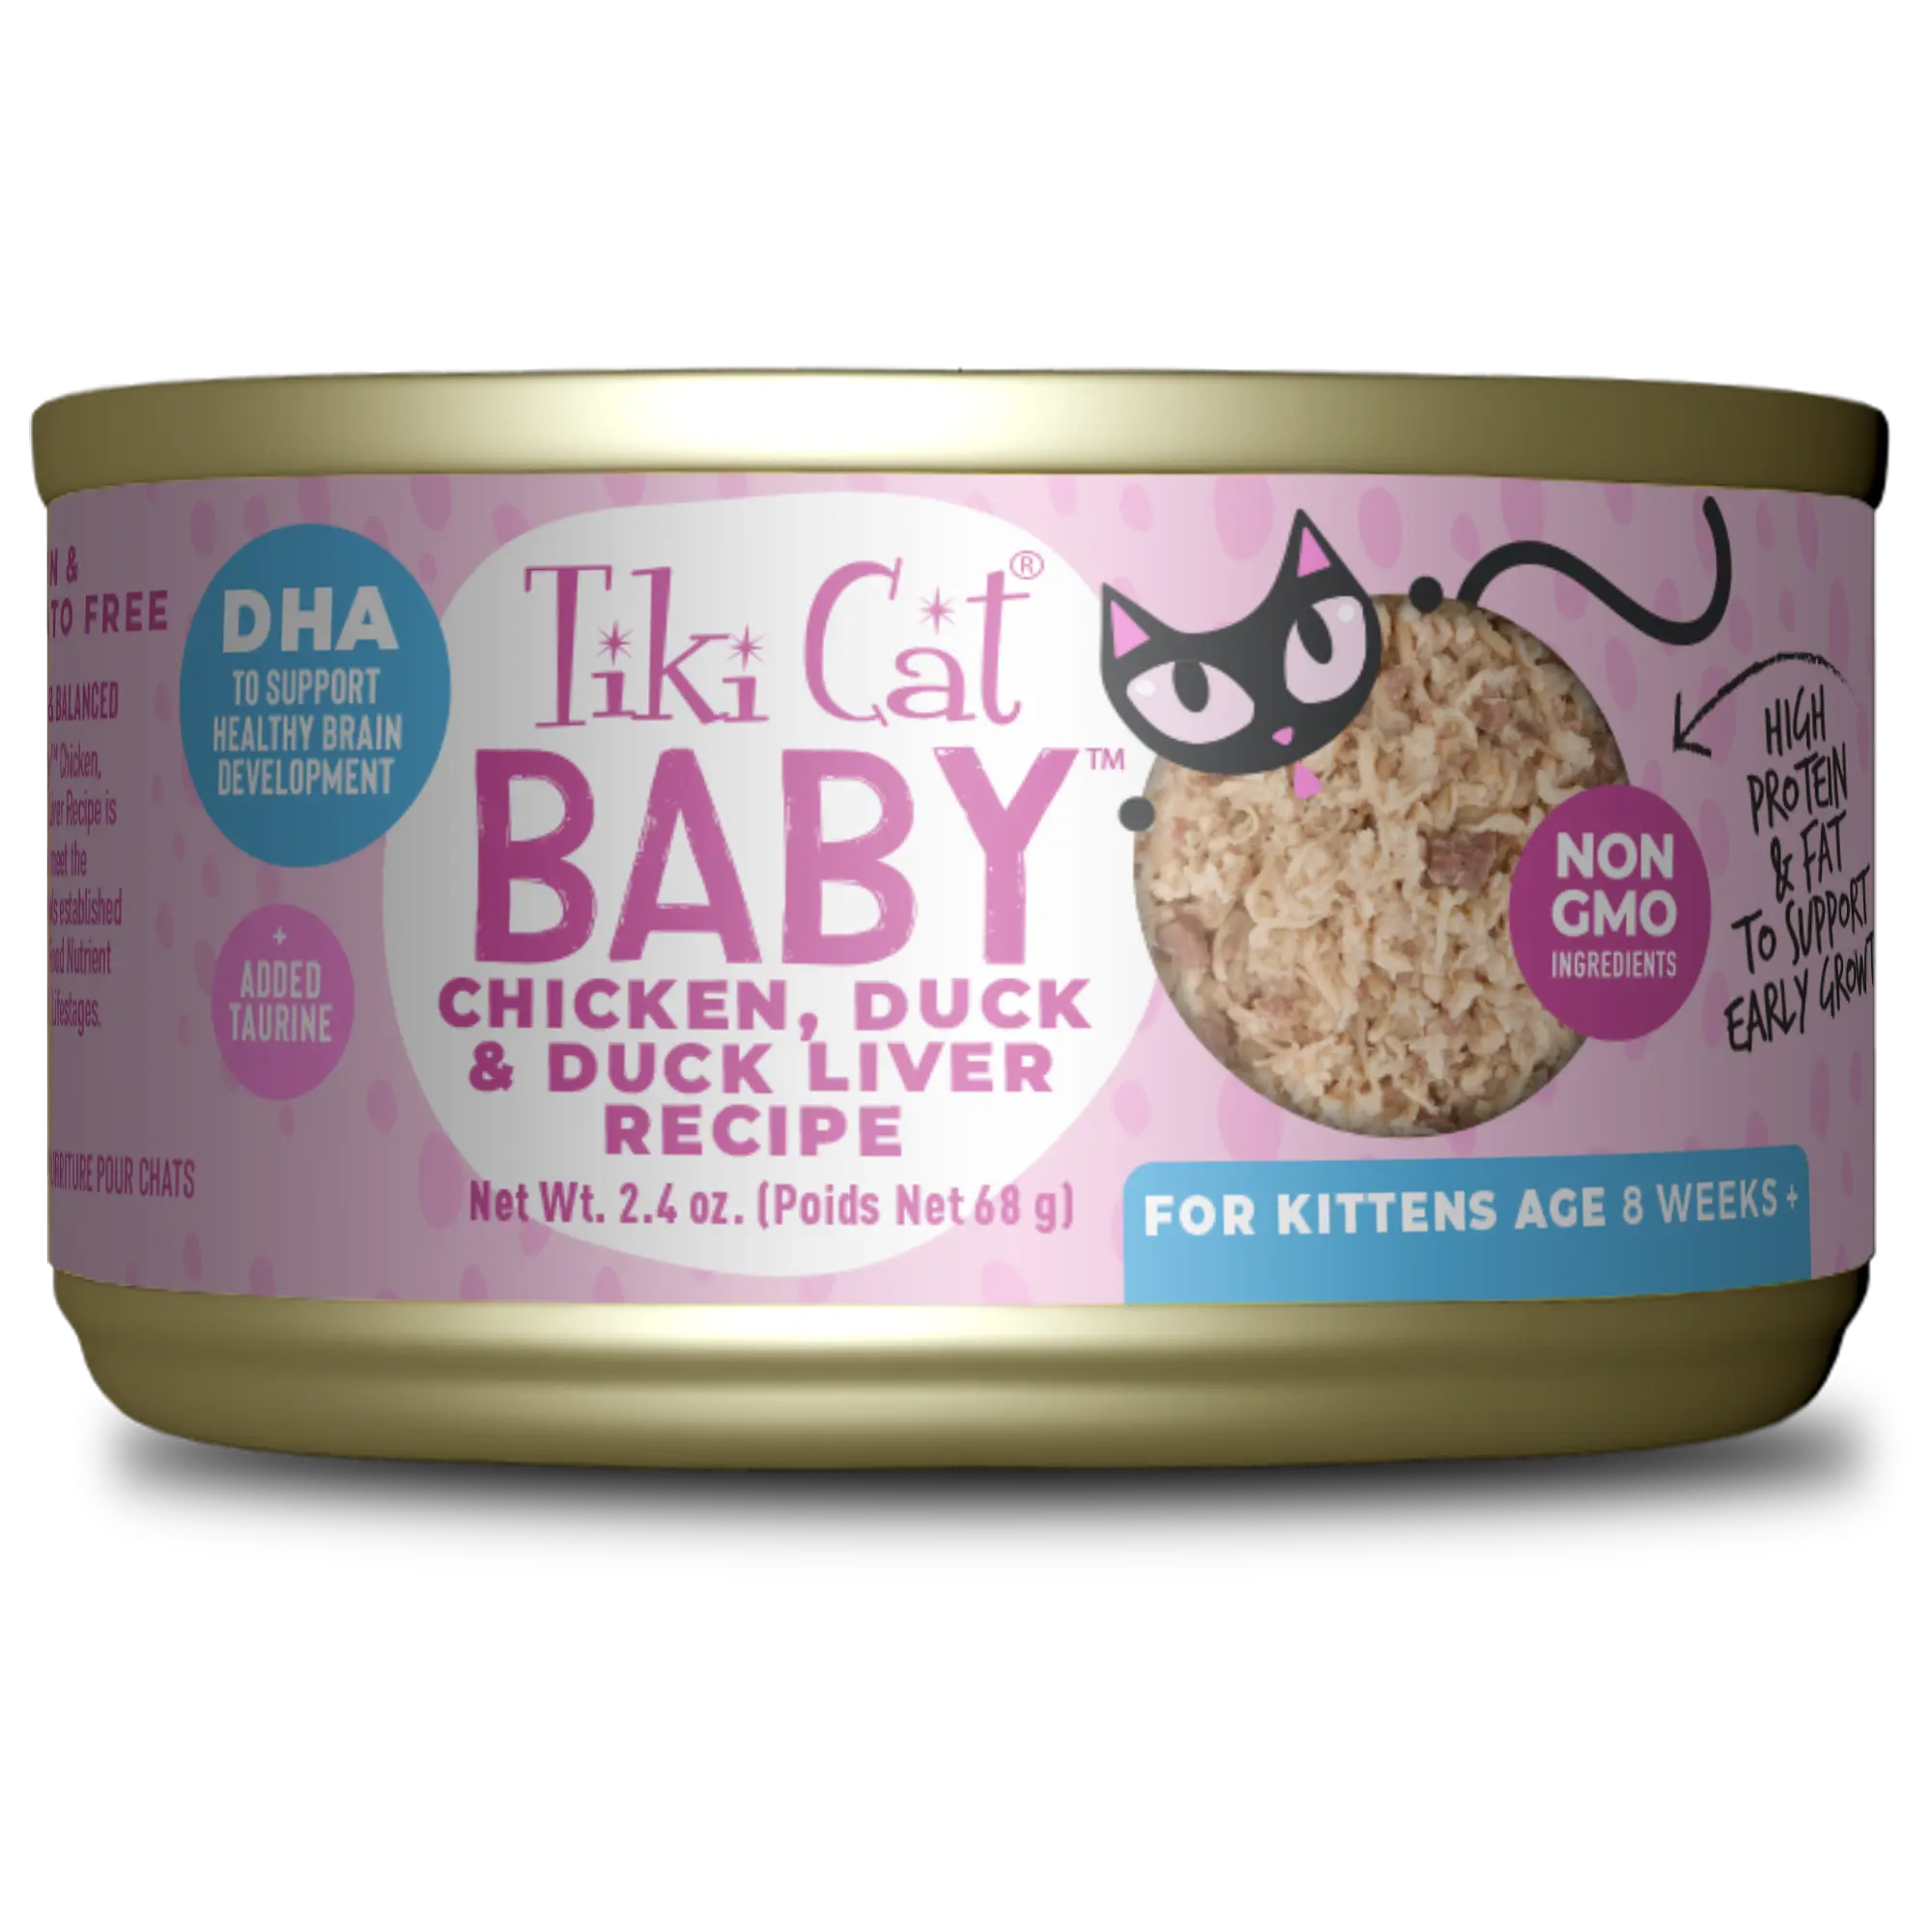 Tiki Cat - Baby - Whole Foods Chicken, Duck & Duck Liver Recipe (For Kittens)